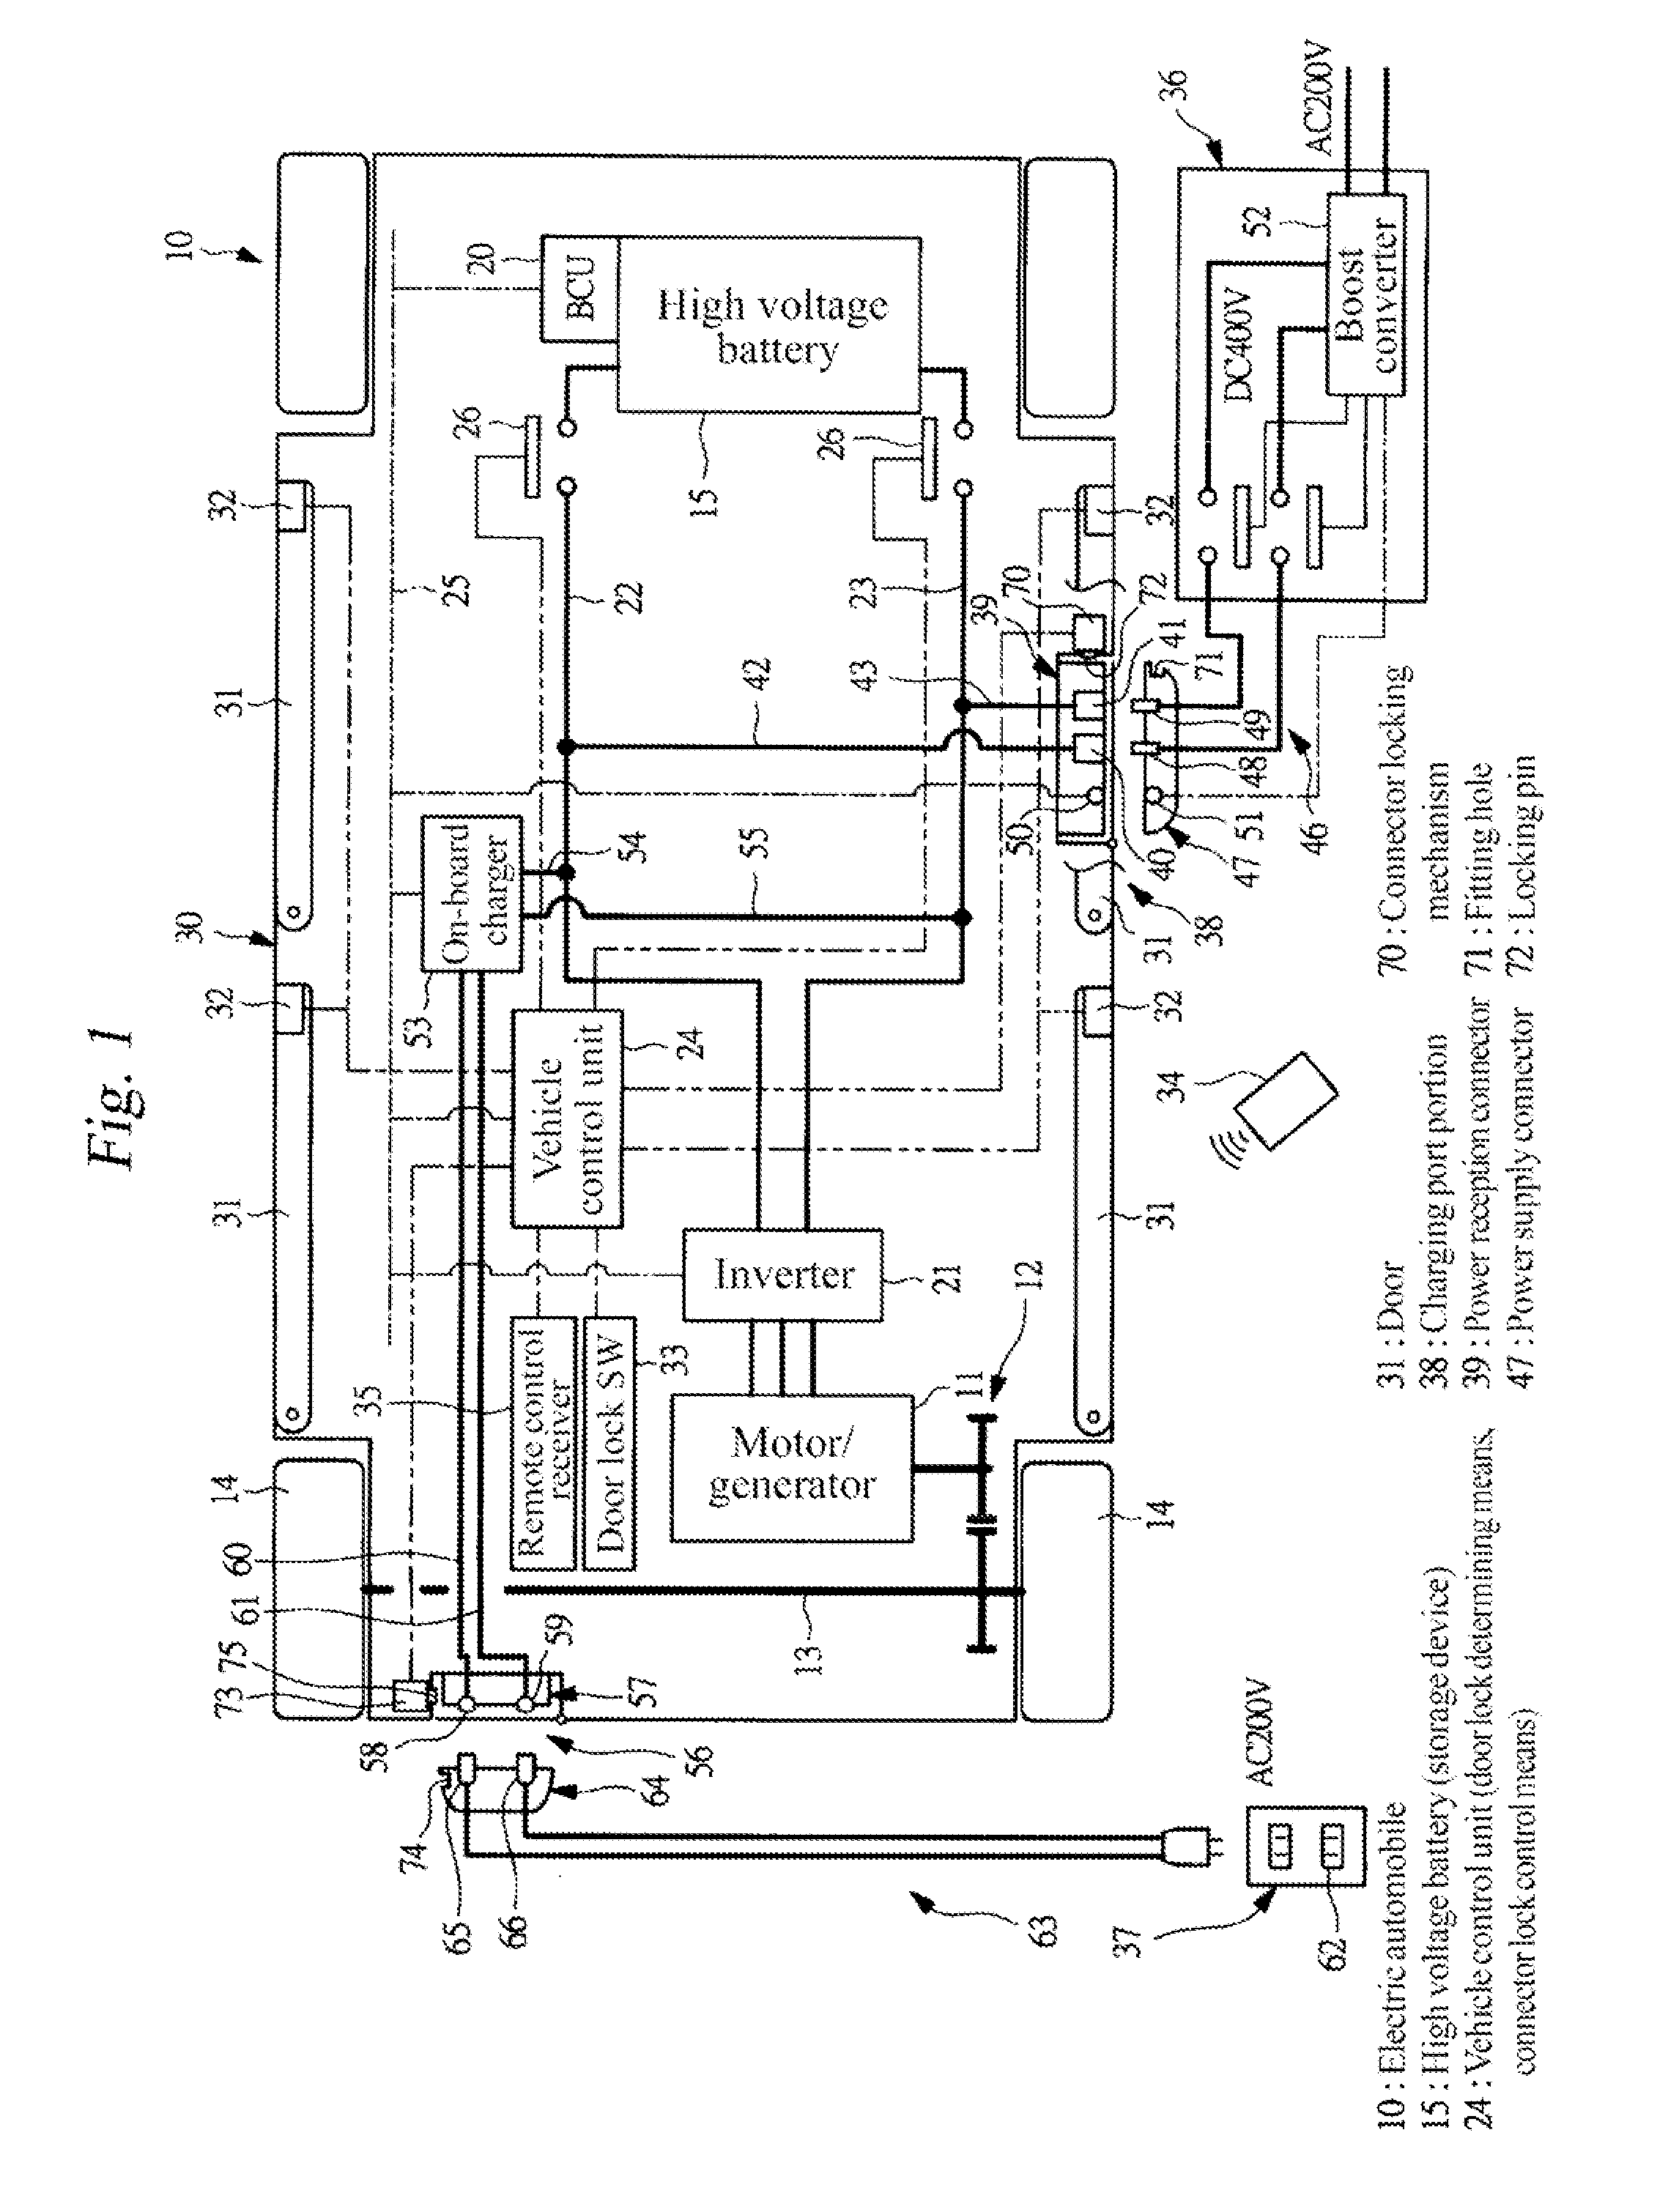 Electric vehicle control device